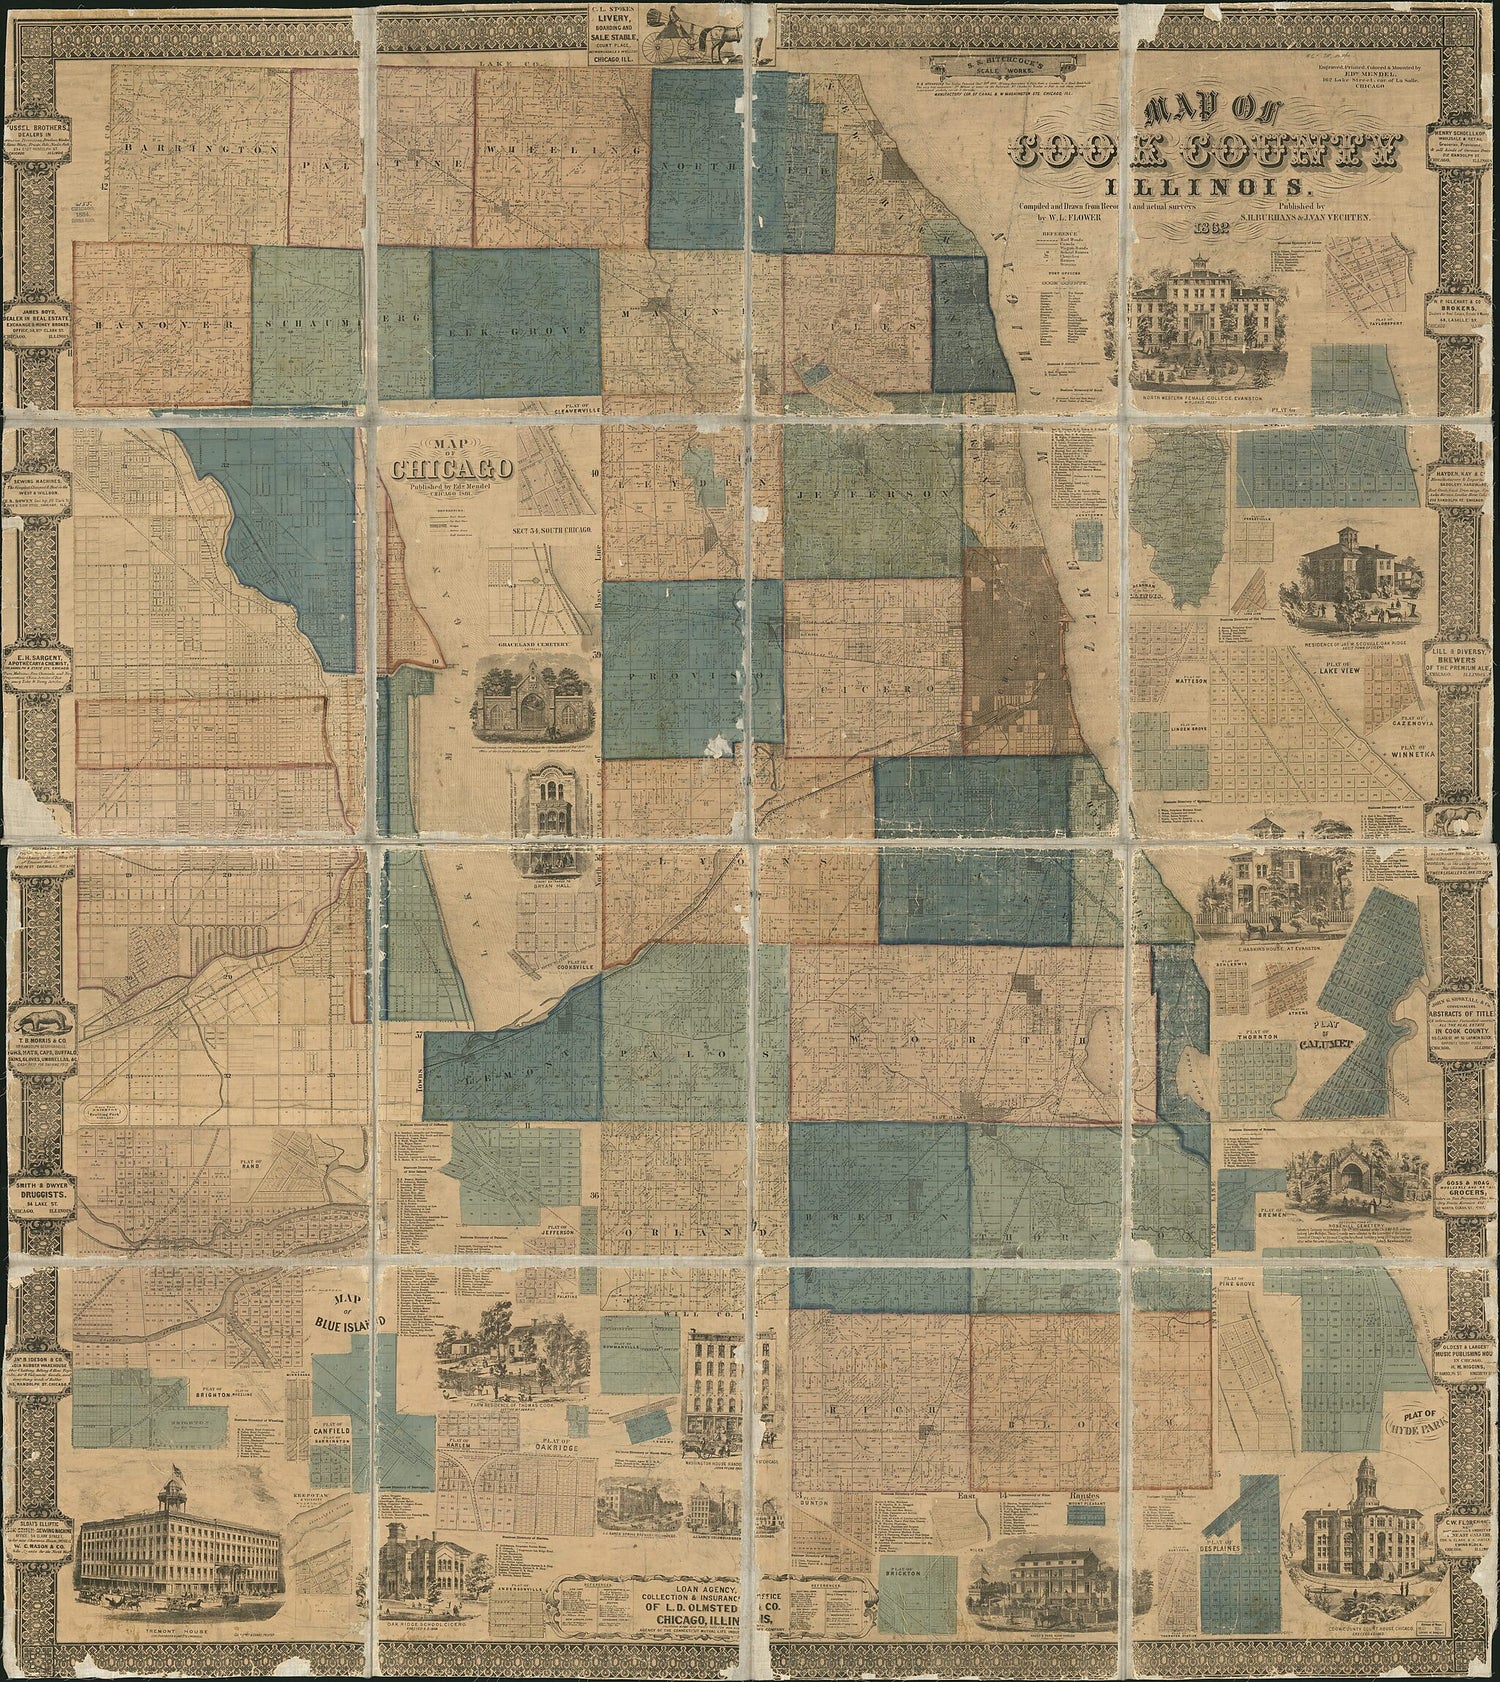 This old map of Map of Cook County, Illinois from 1862 was created by W. L. Flower in 1862